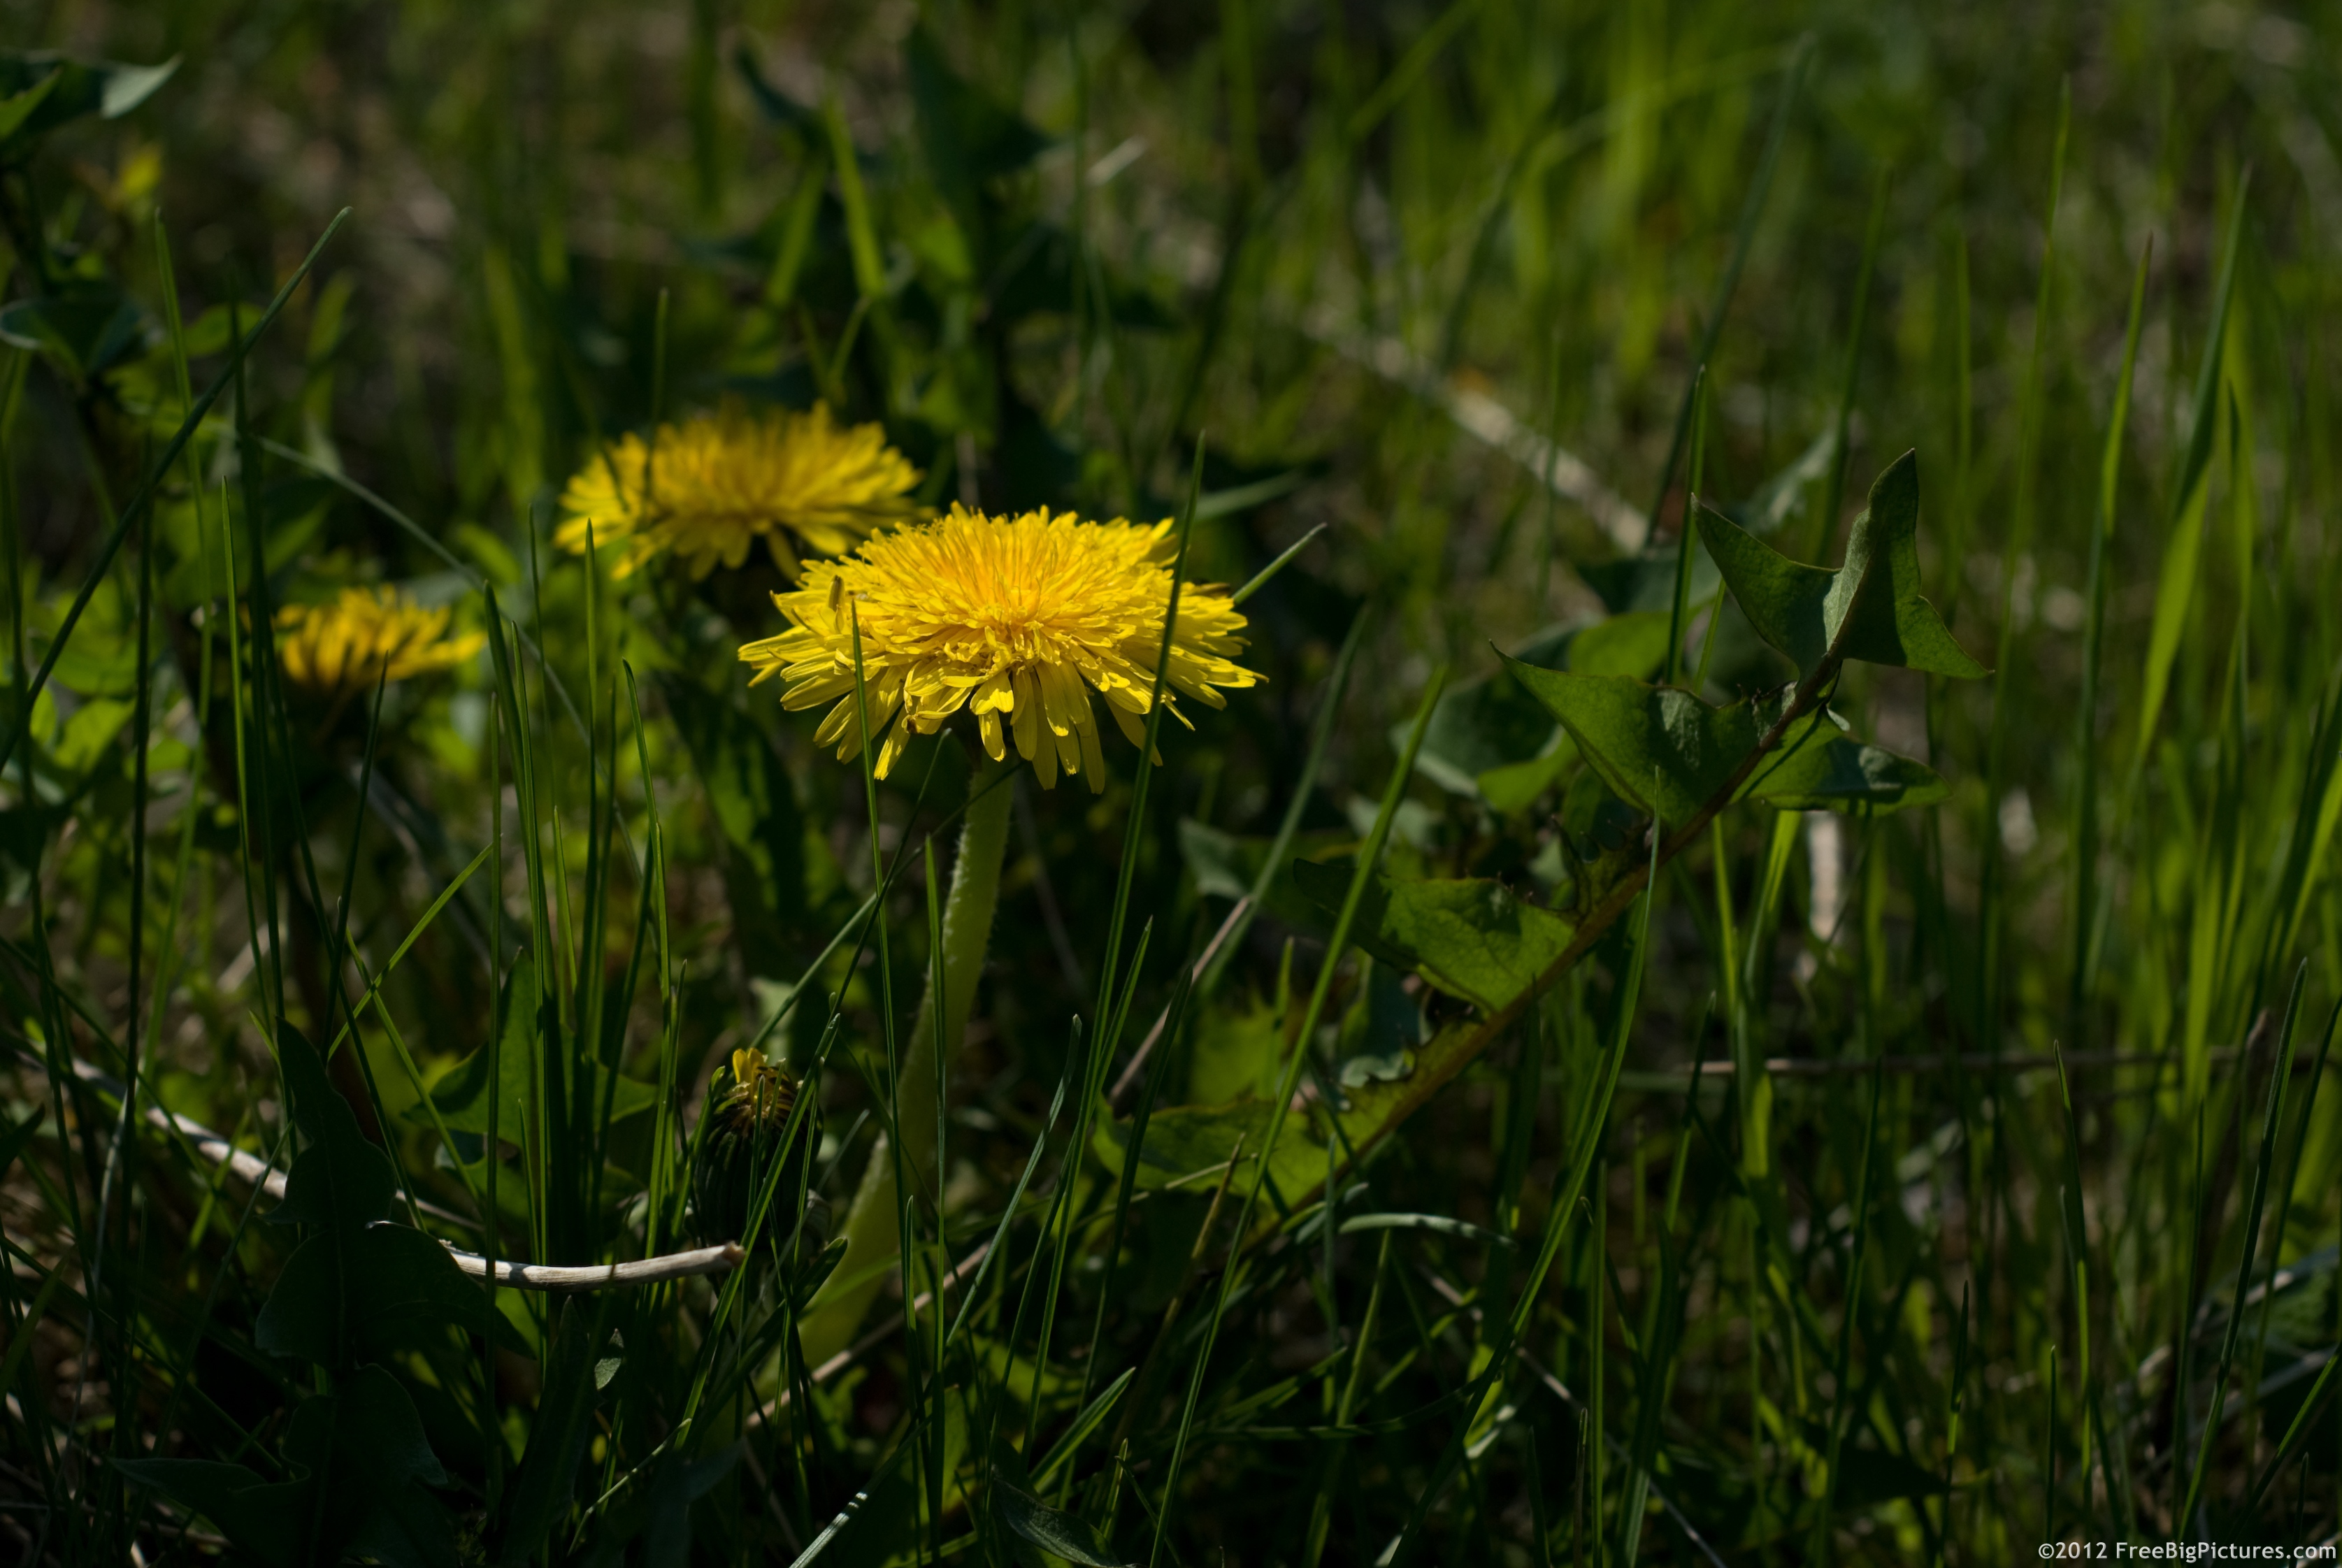 Dandelion, a common herb spread on North America and Eurasia